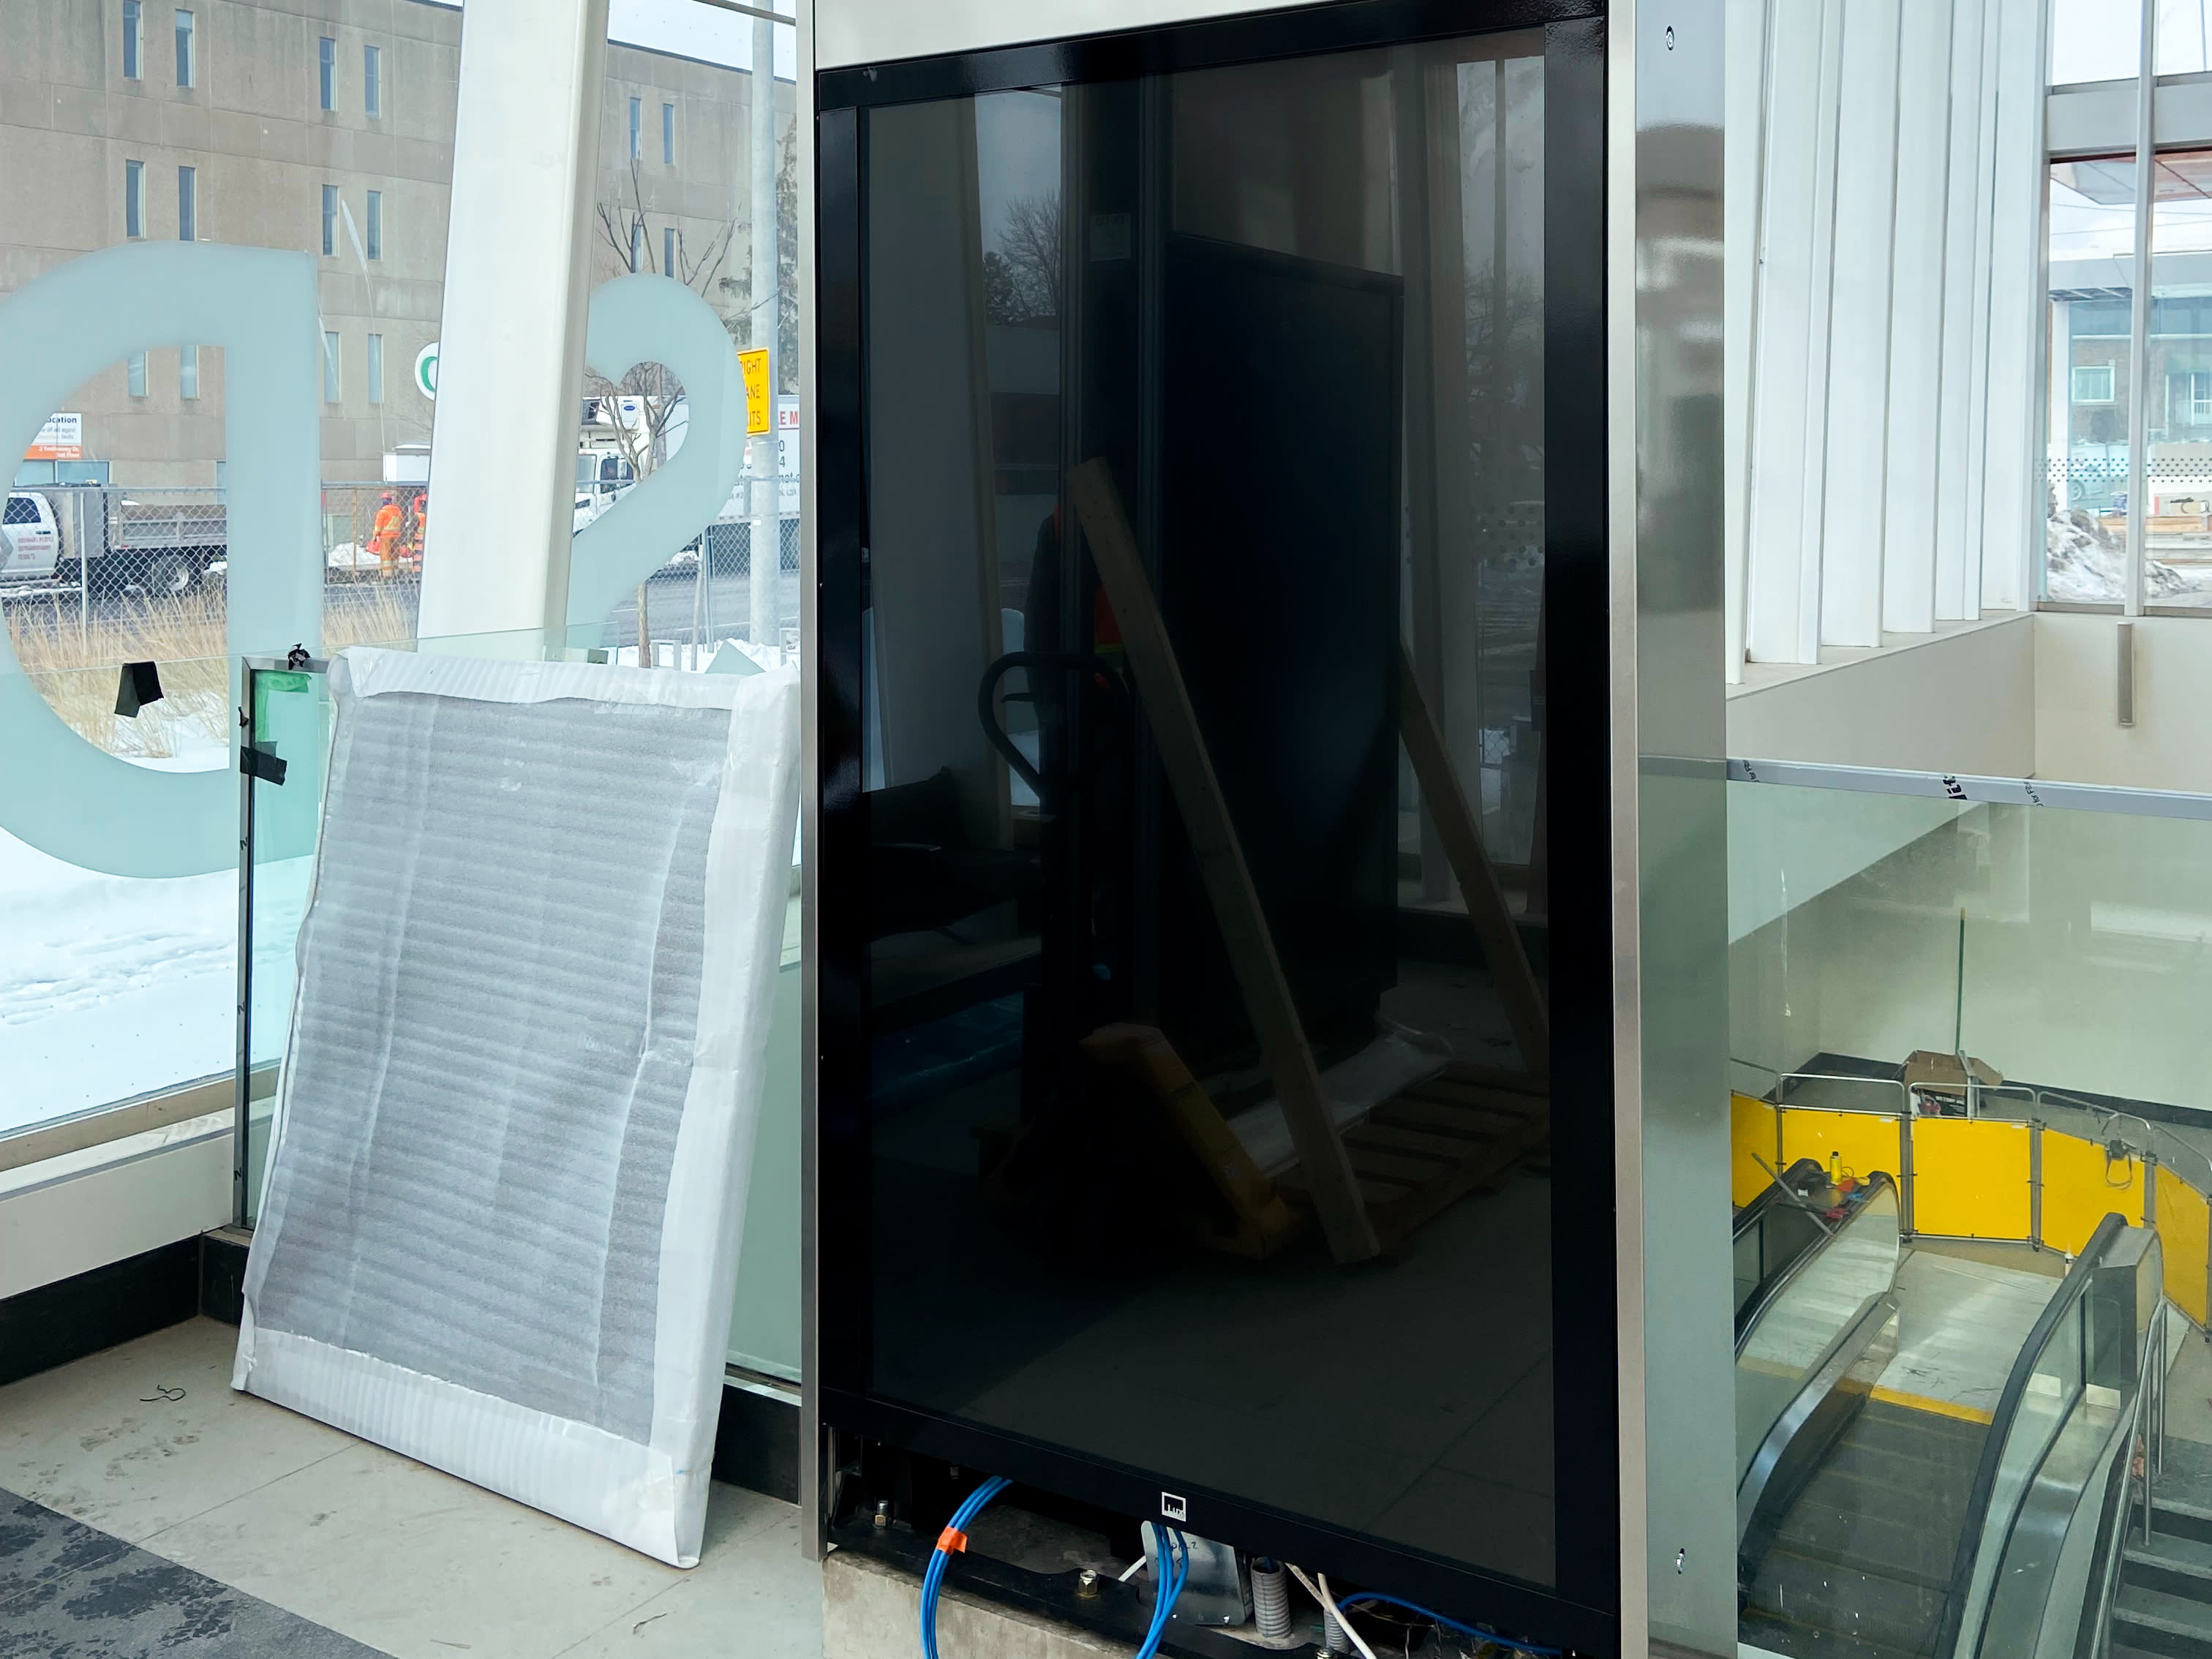 interactive kiosk being installed